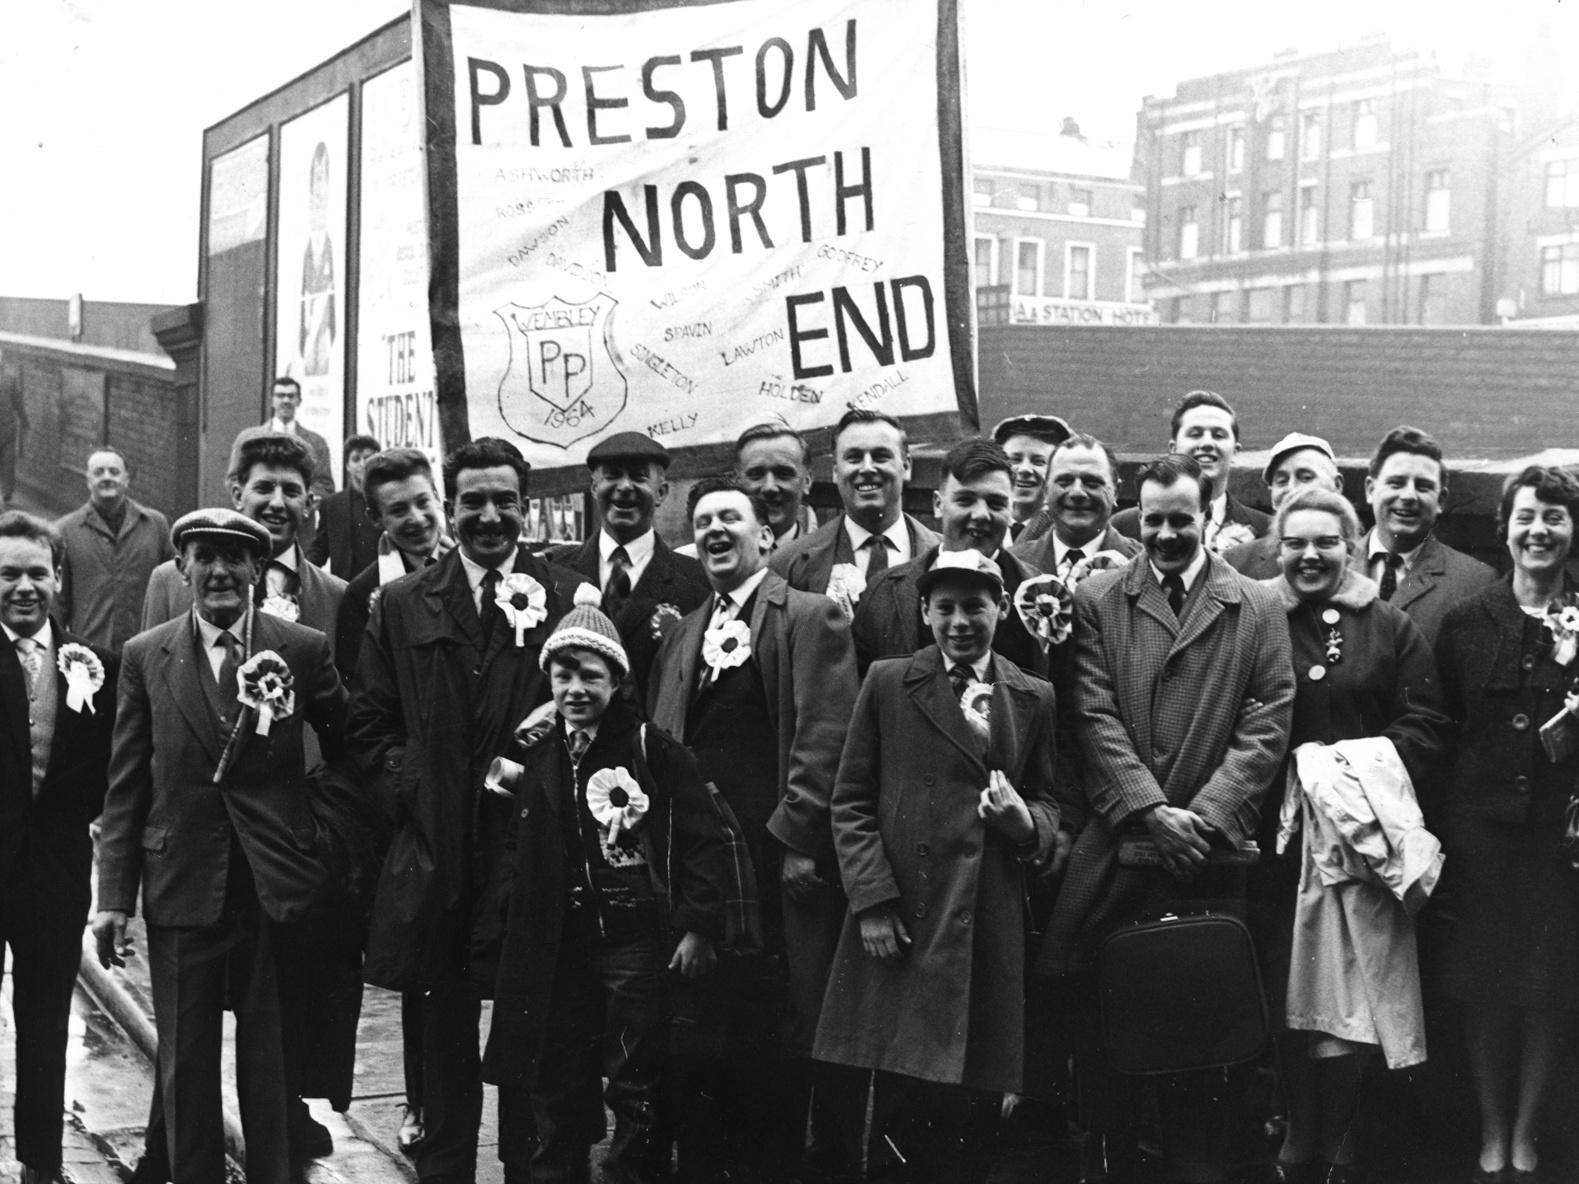 Preston fans outside Preston Station ahead of their journey to Wembley for the 1964 FA Cup final